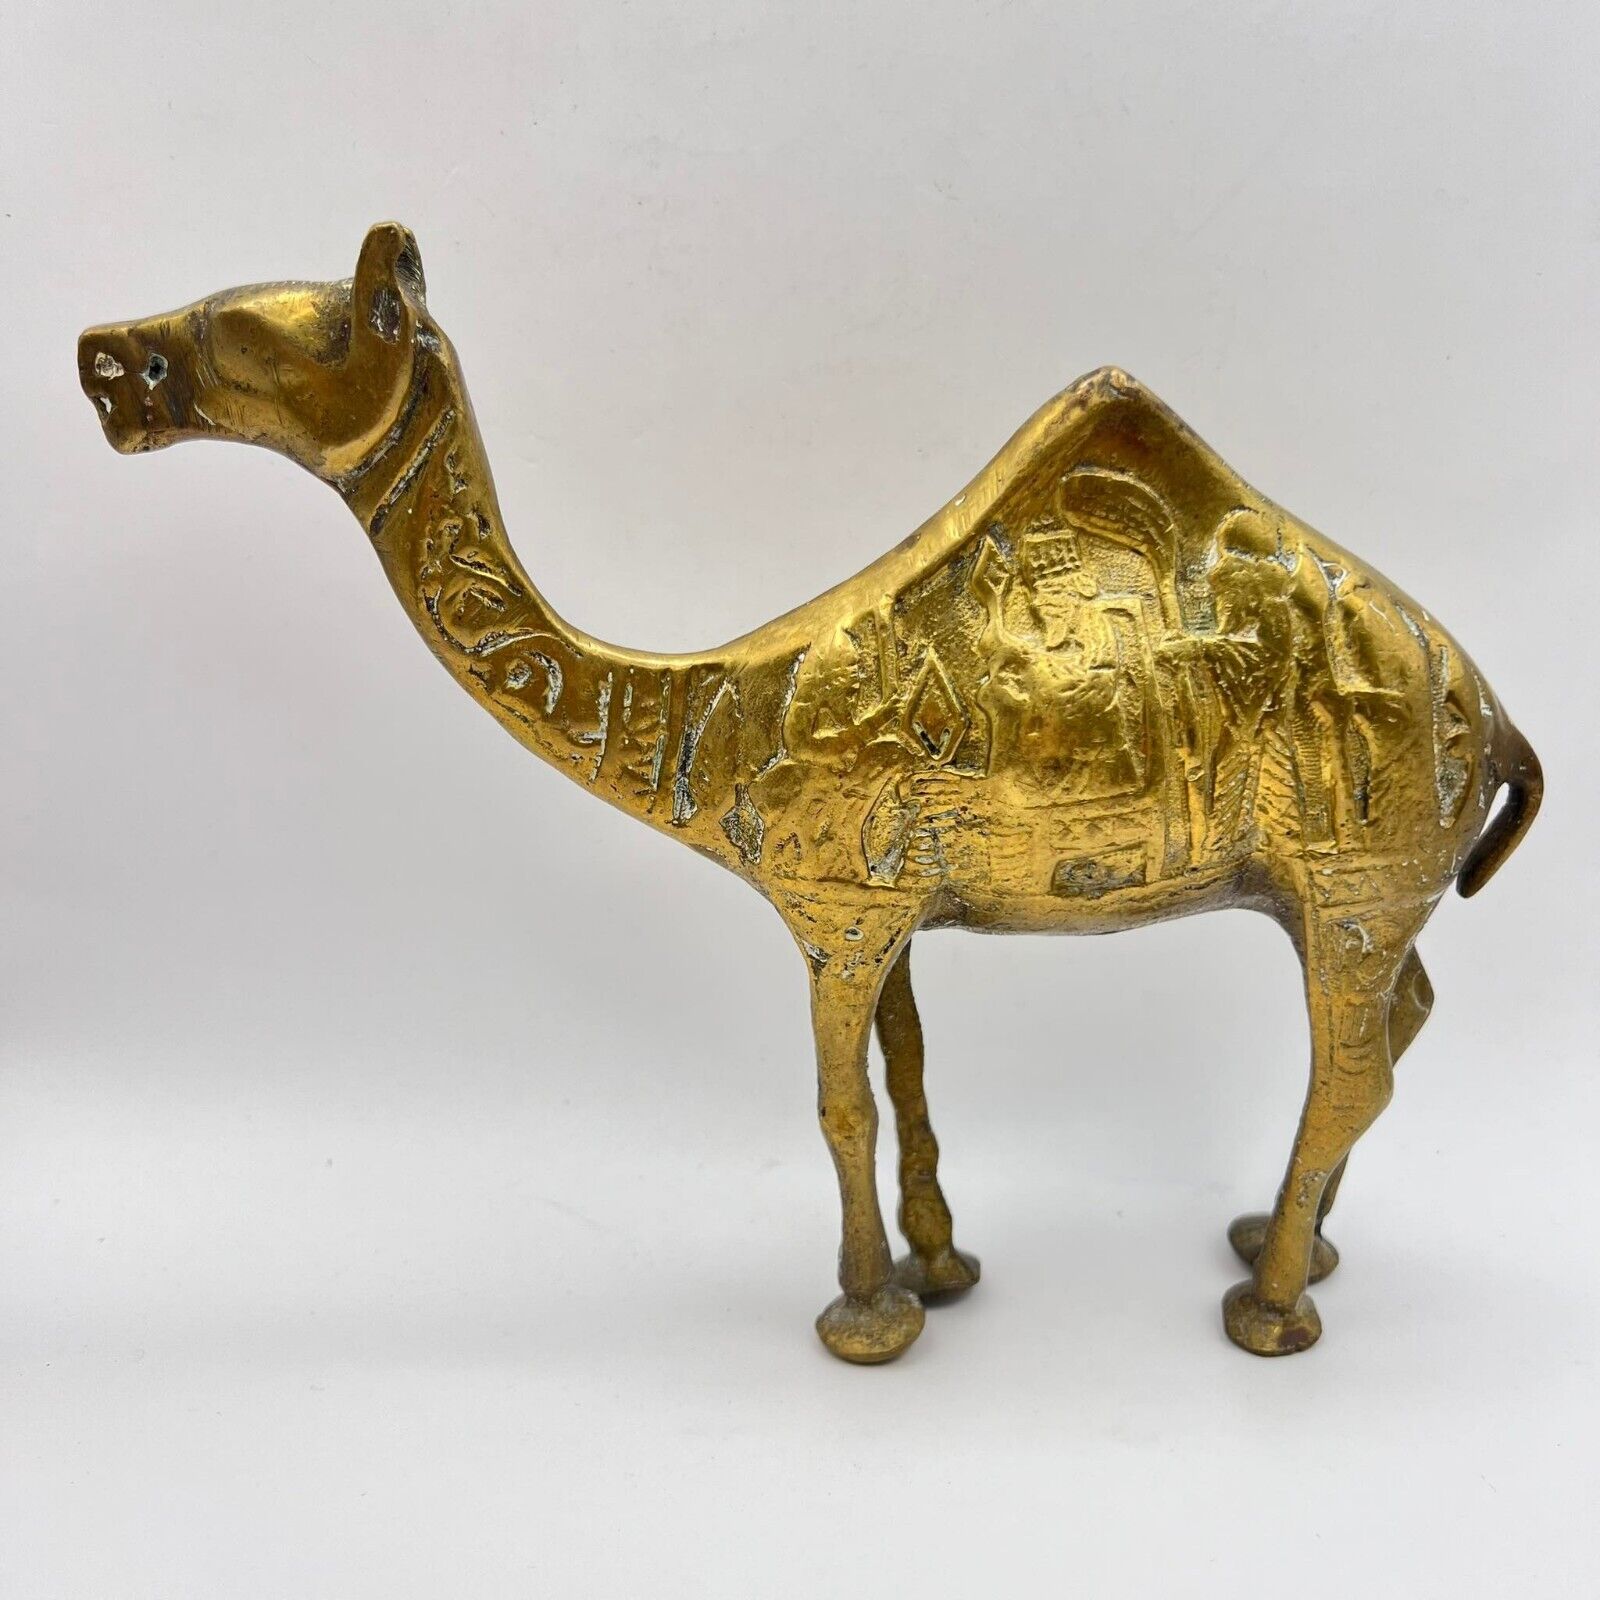 Vintage Large Camel Figurine Brass Handmade Etched Egyptian Decor Collectibles